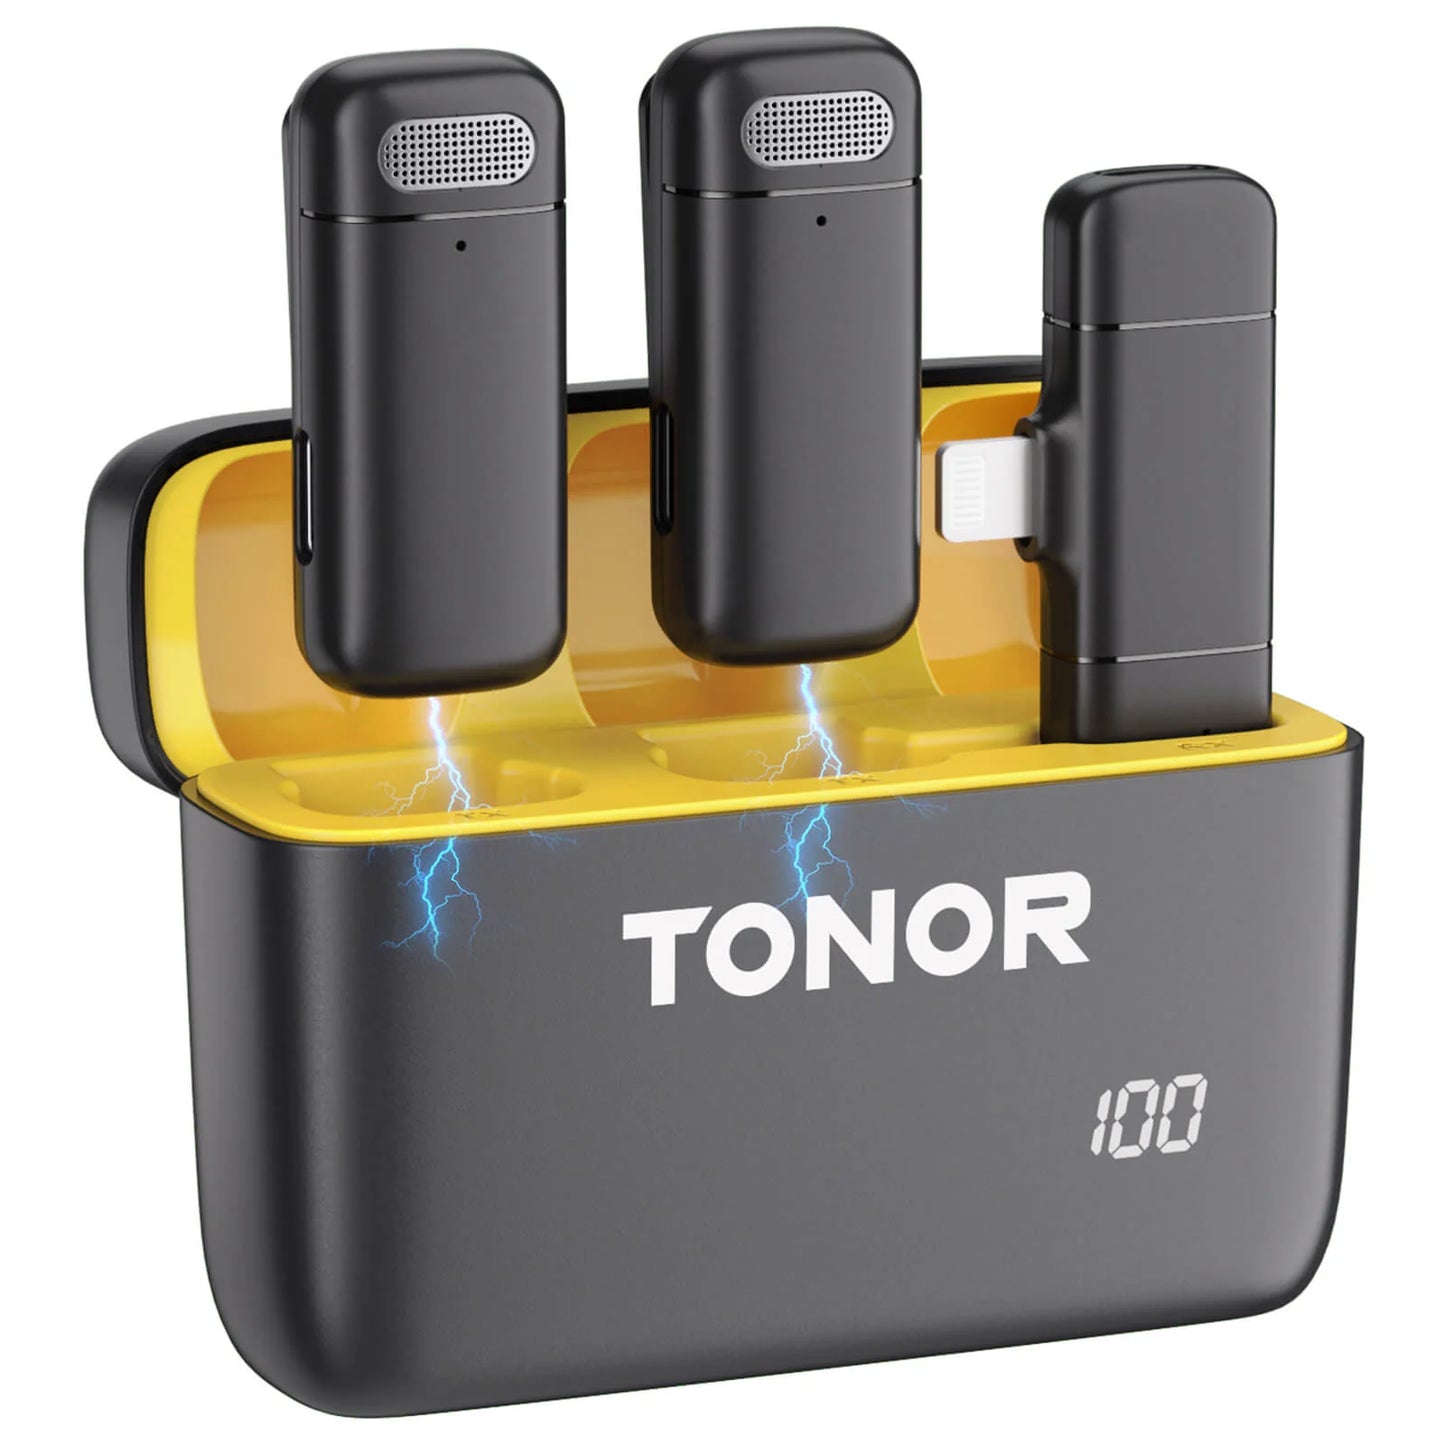 TONOR wireless lavalier microphone - specially designed for iPhone/iPad/Android mobile phones